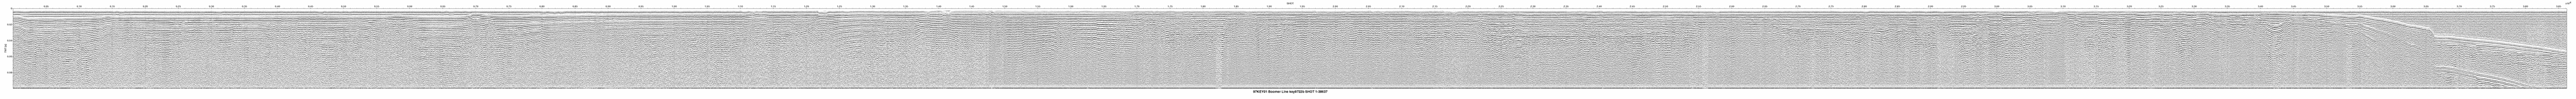 Thumbnail GIF image of the seismic trackline key9722b, with a hotlink to the more detailed, larger JPG image.